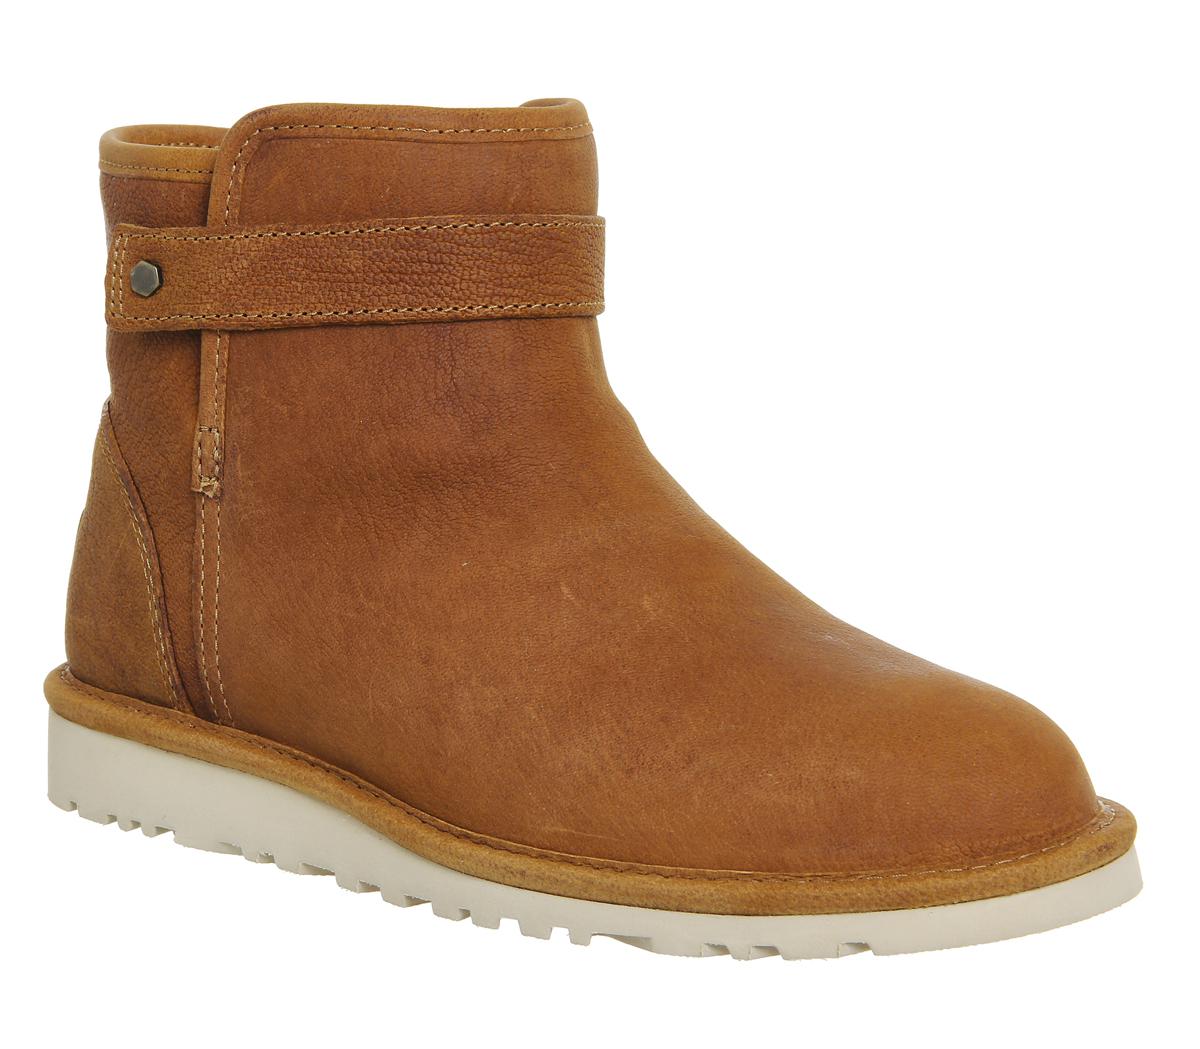 UGG Rella Boots in Brown - Lyst